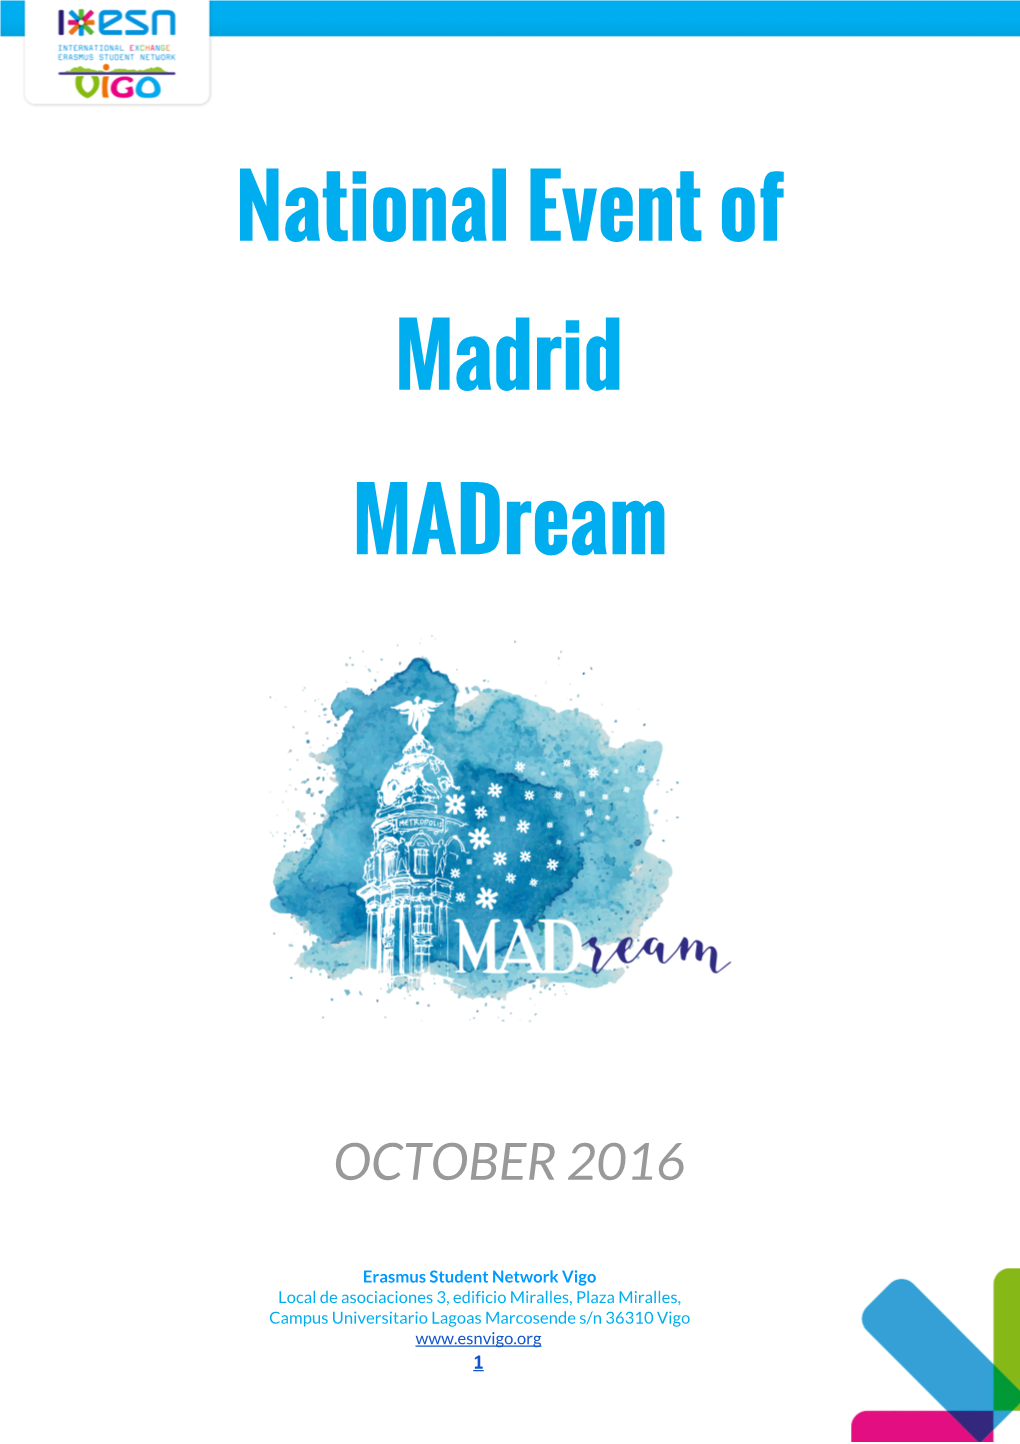 National Event of Madrid Madream